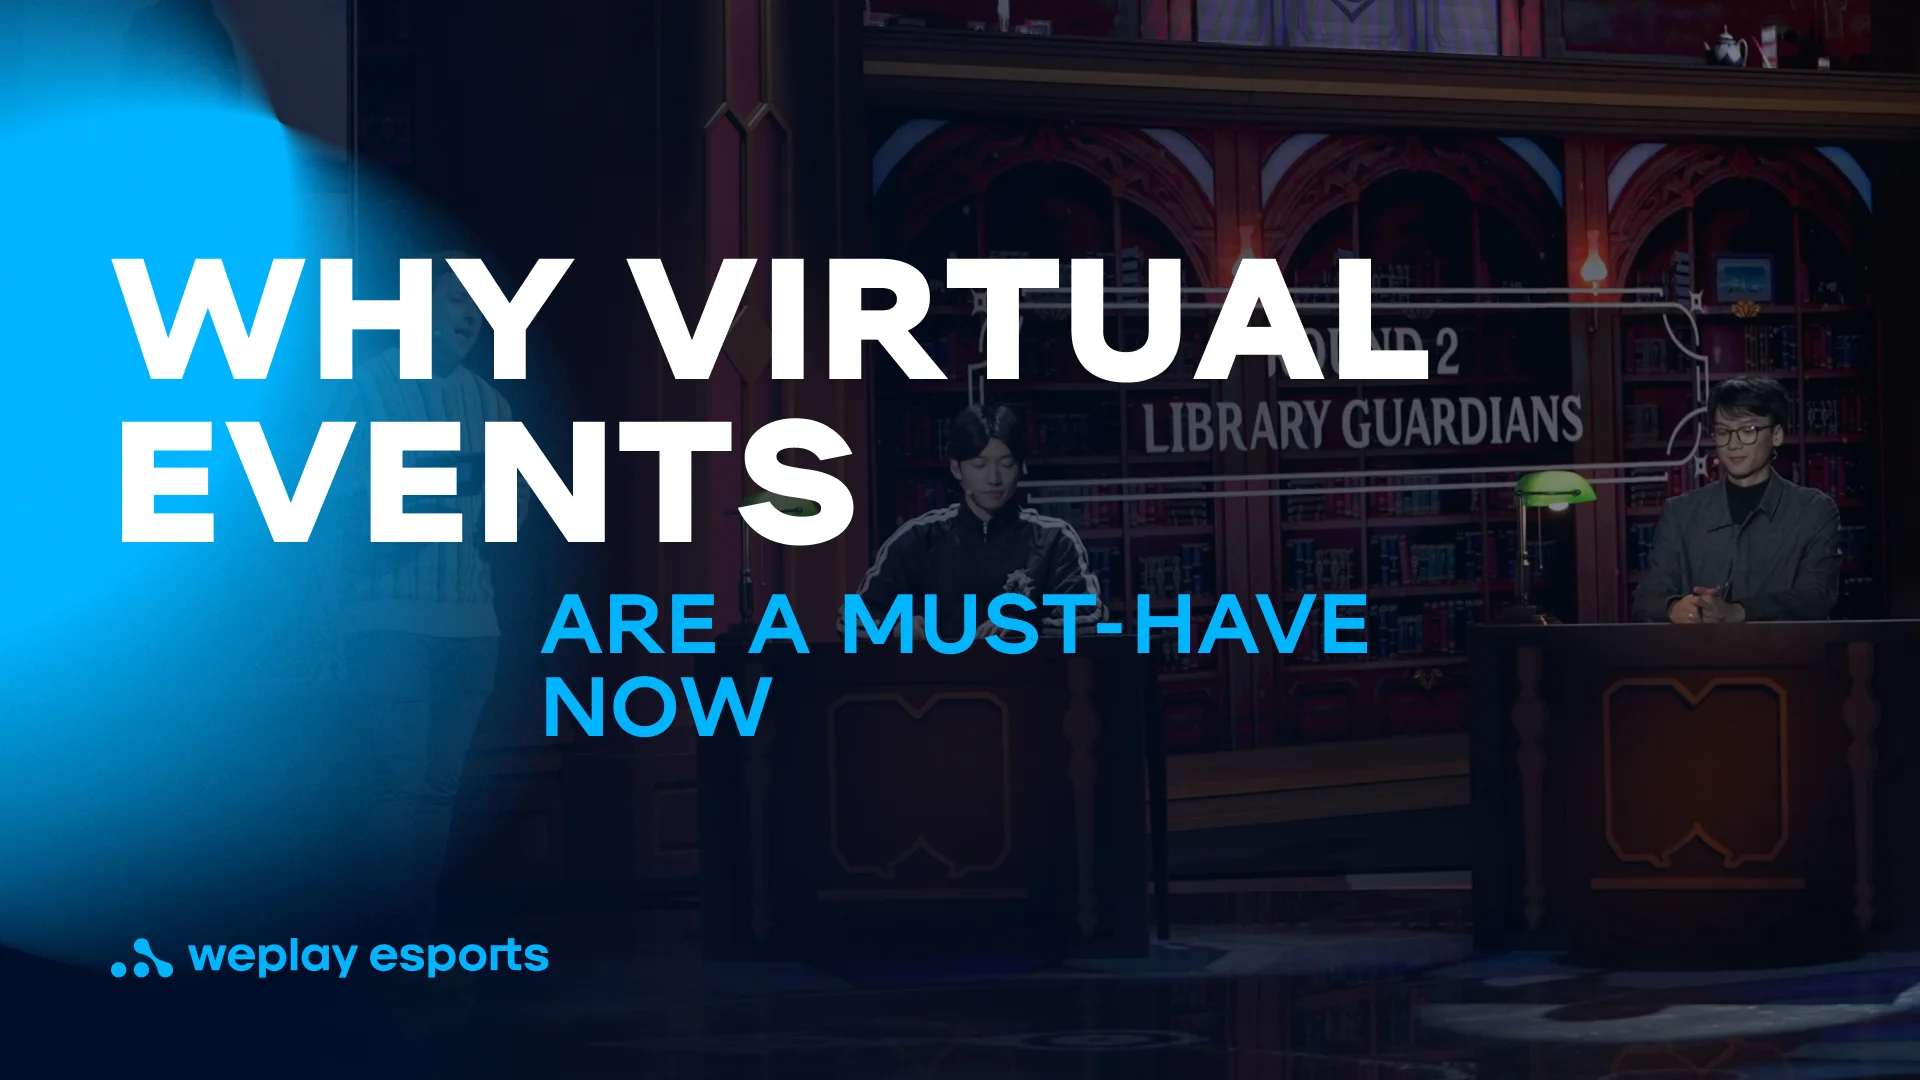 Why virtual events are a must-have now